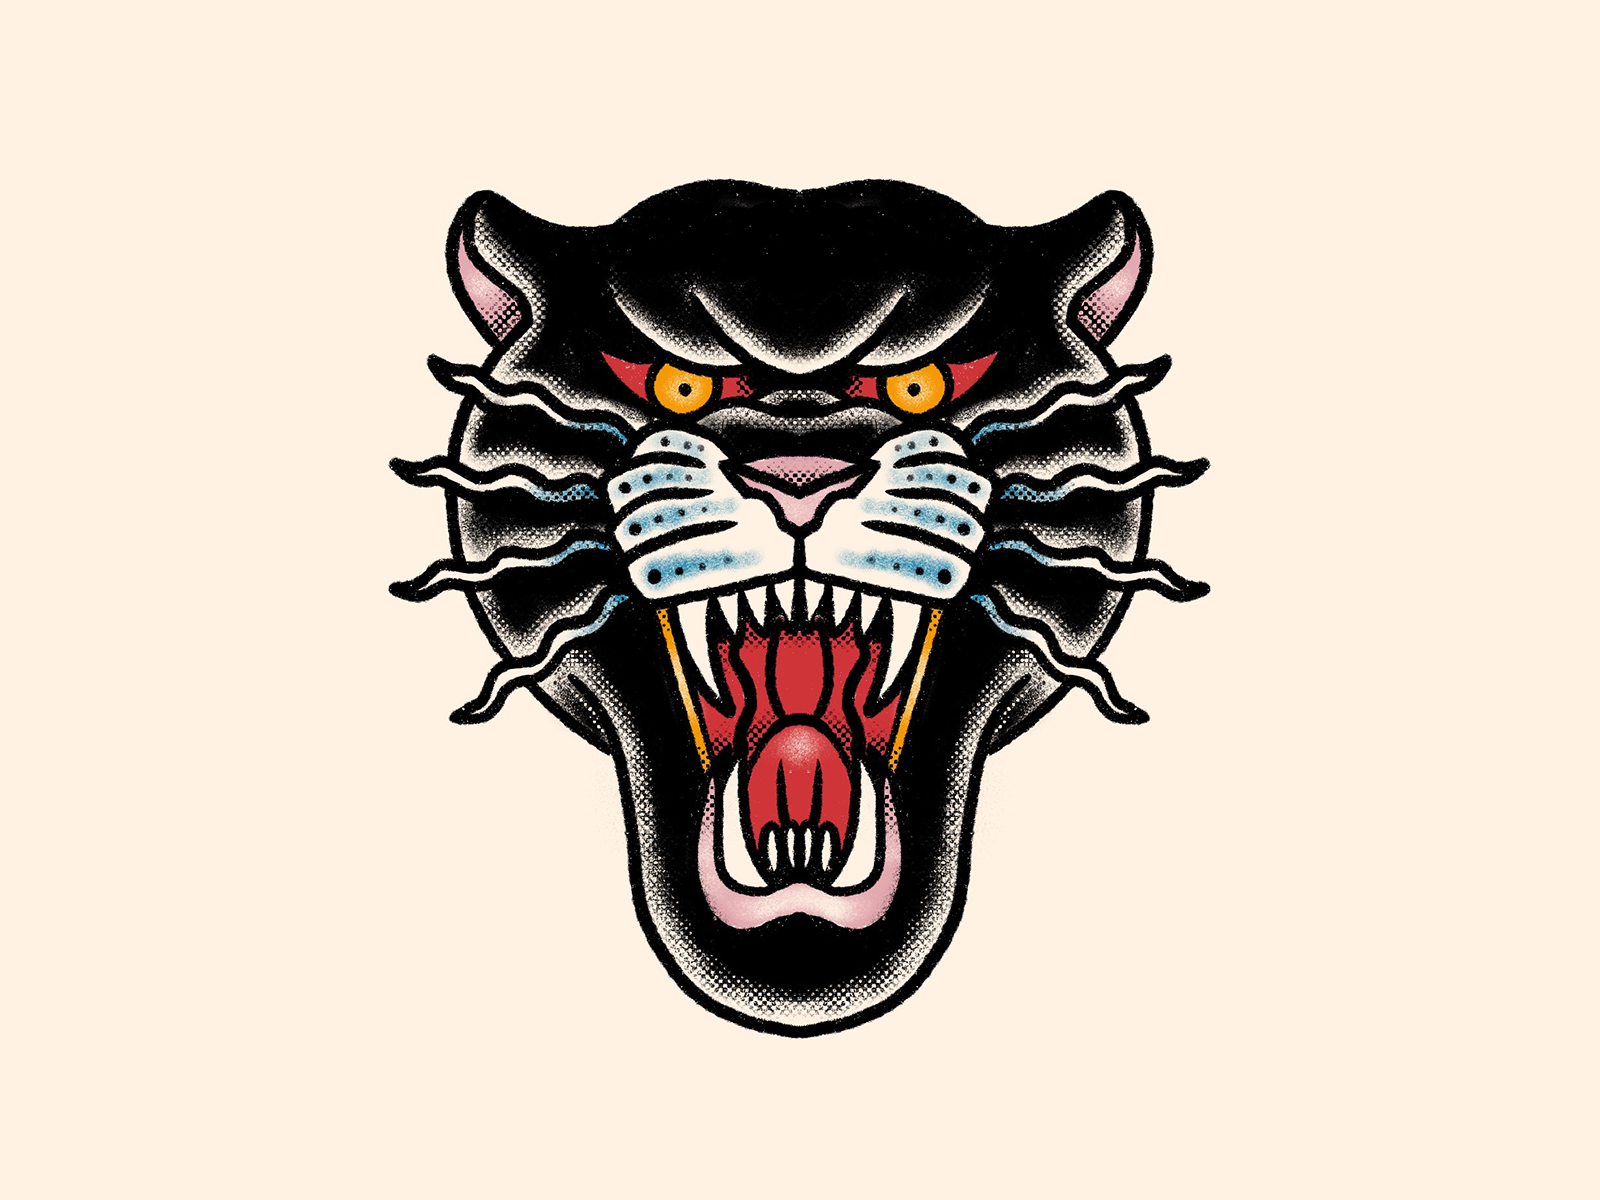 Share more than 76 panther face tattoo  thtantai2